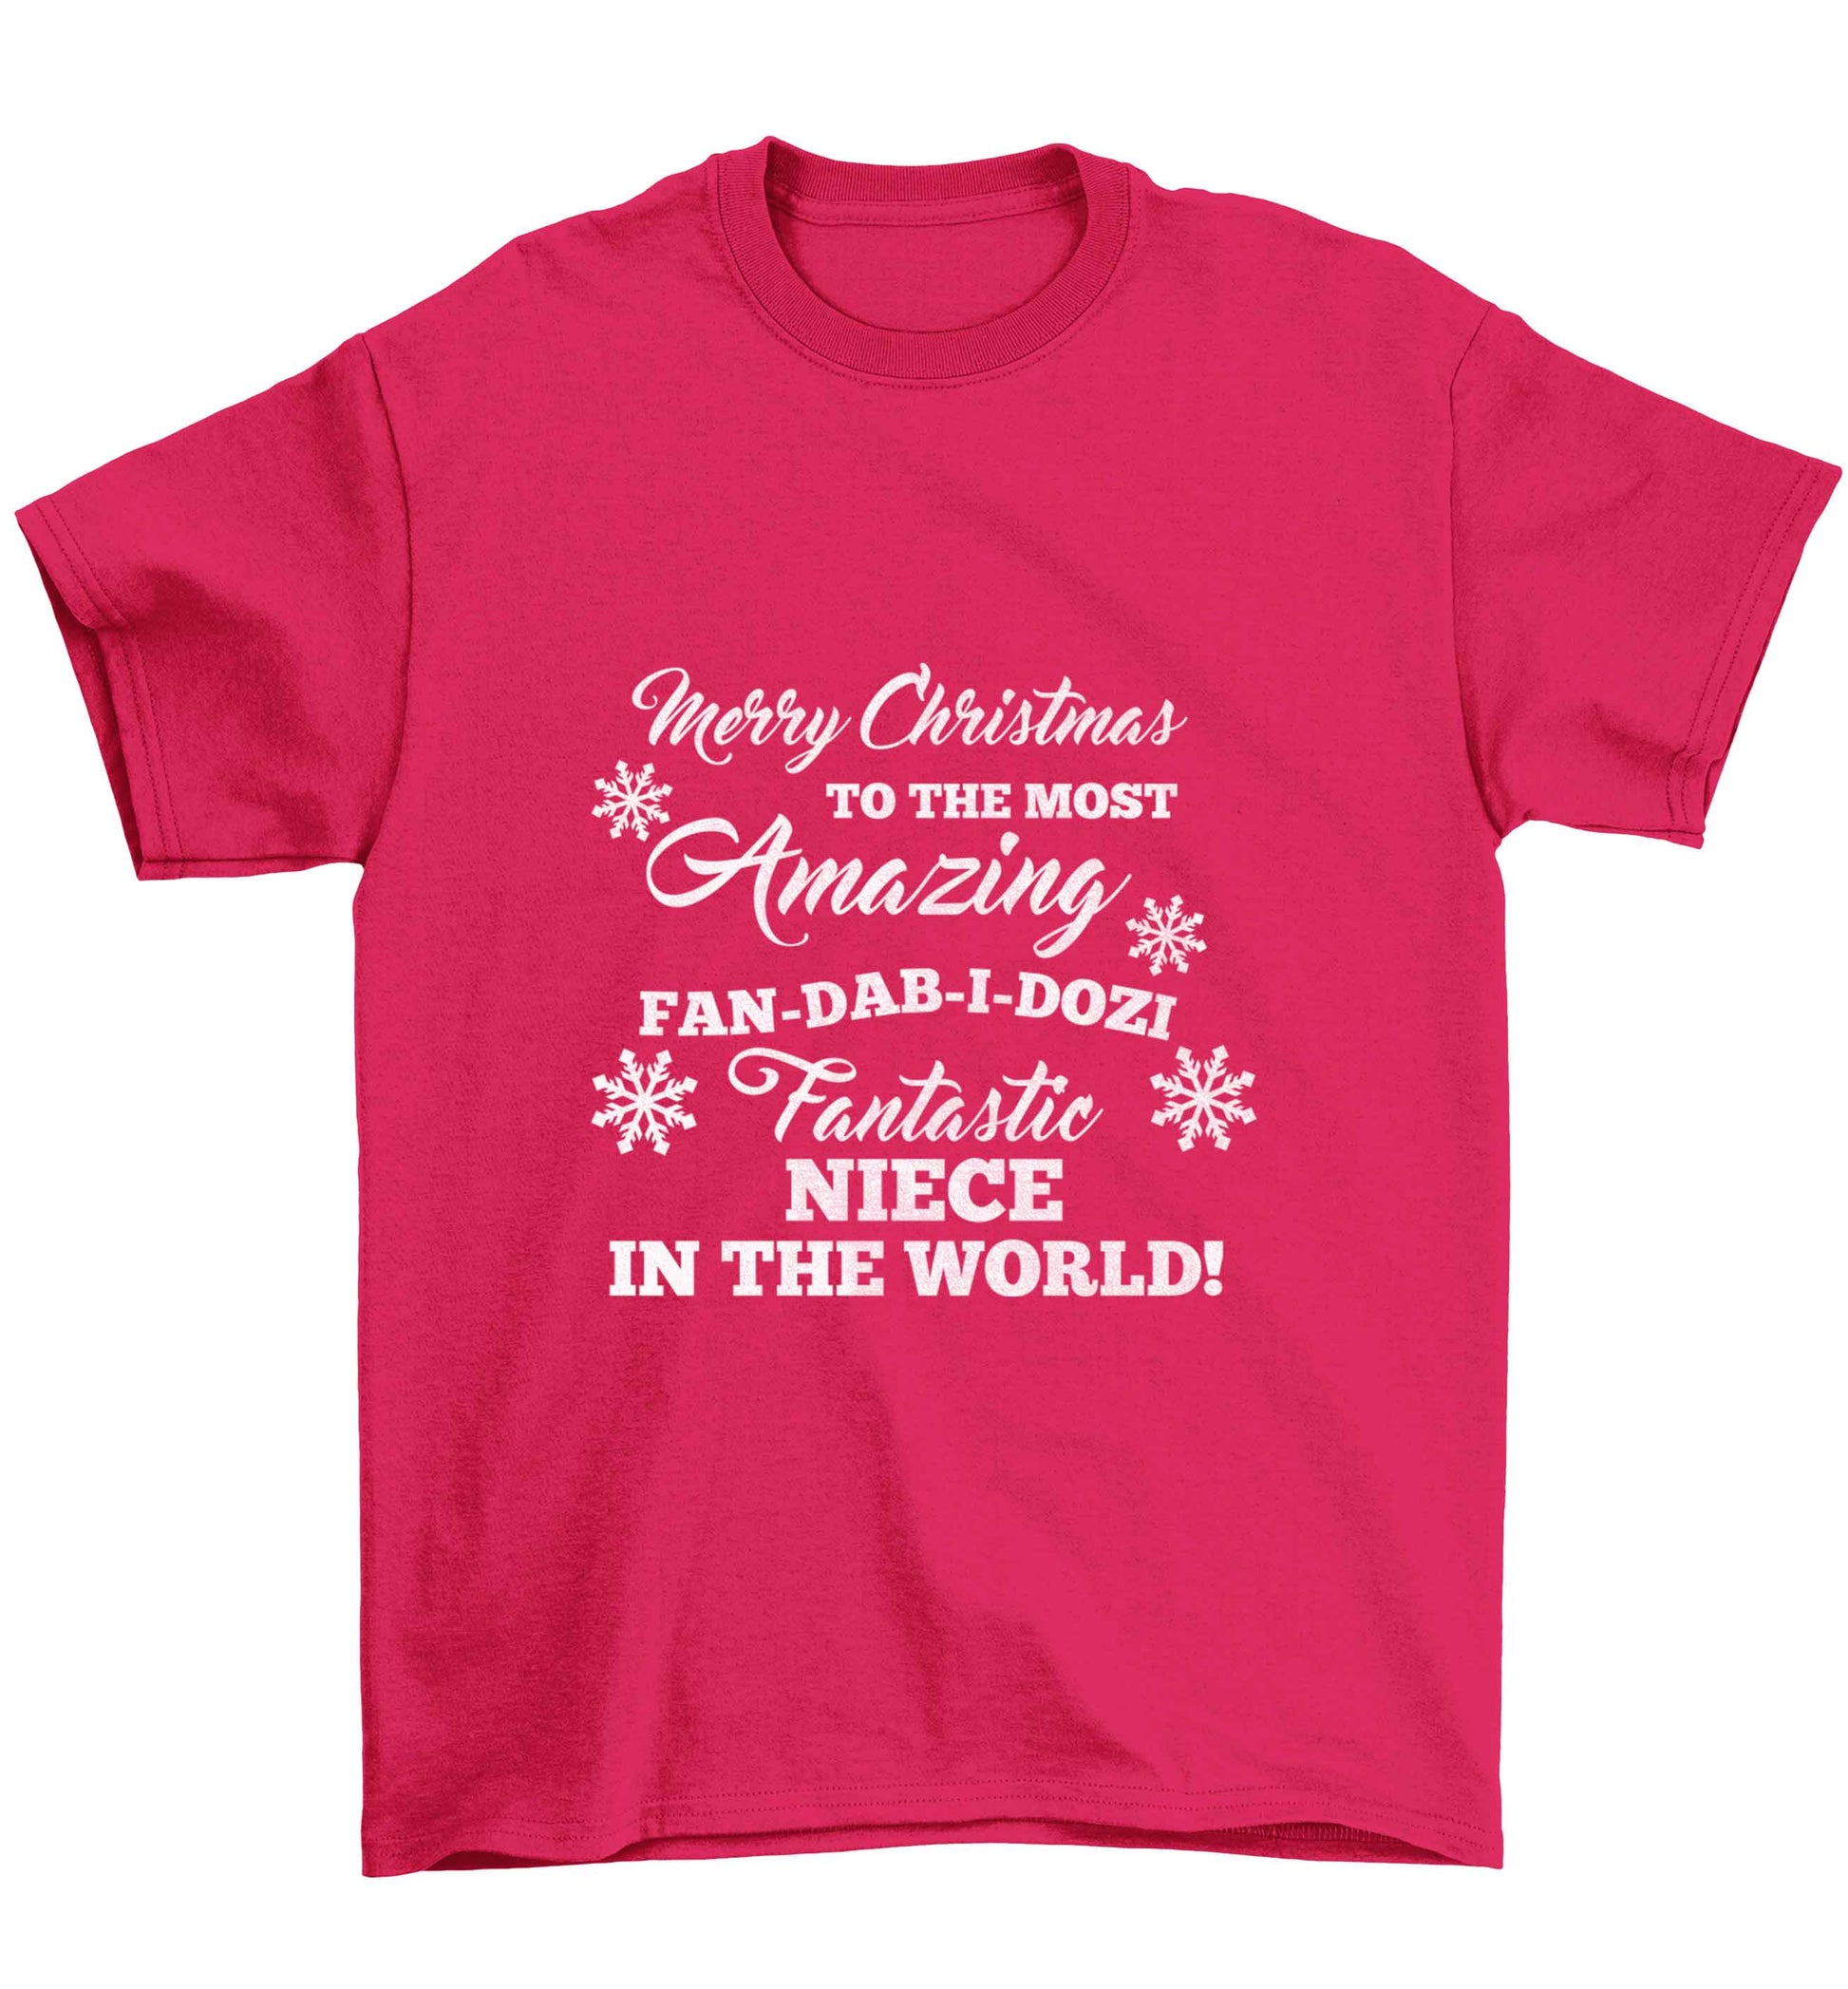 Merry Christmas to the most amazing fan-dab-i-dozi fantasic Niece in the world Children's pink Tshirt 12-13 Years